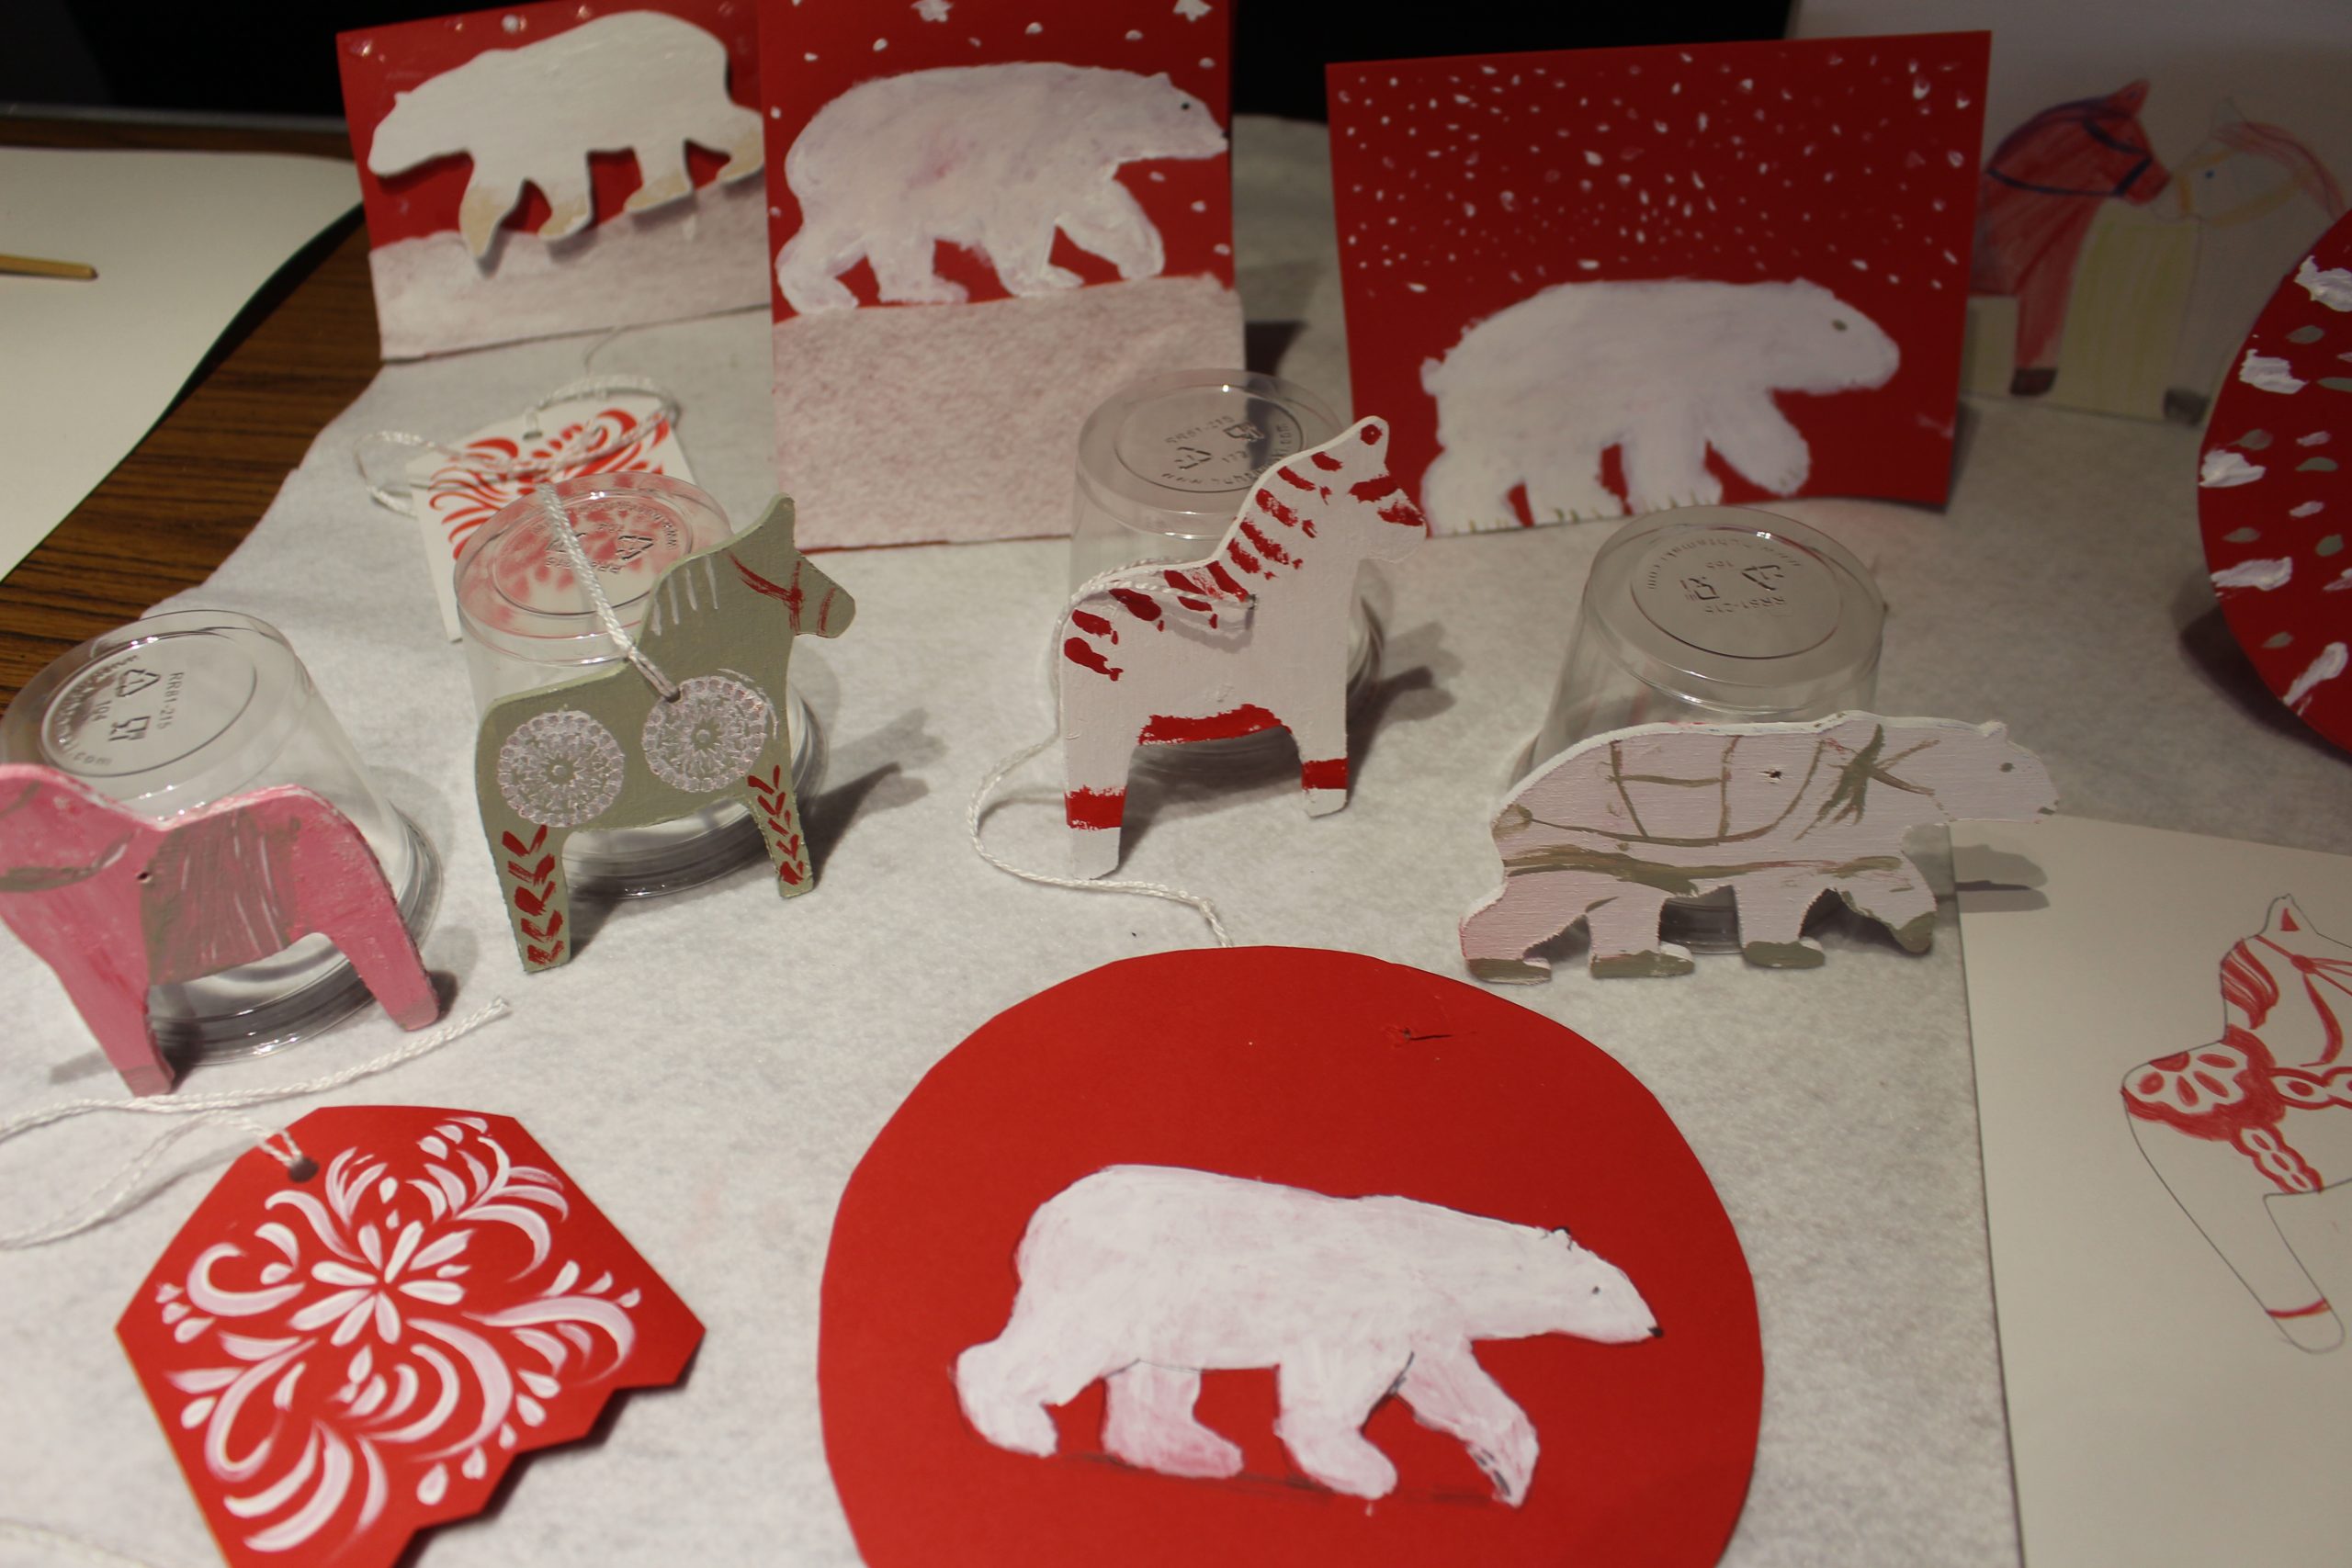 A selection of children's crafts including red and white polar bears.